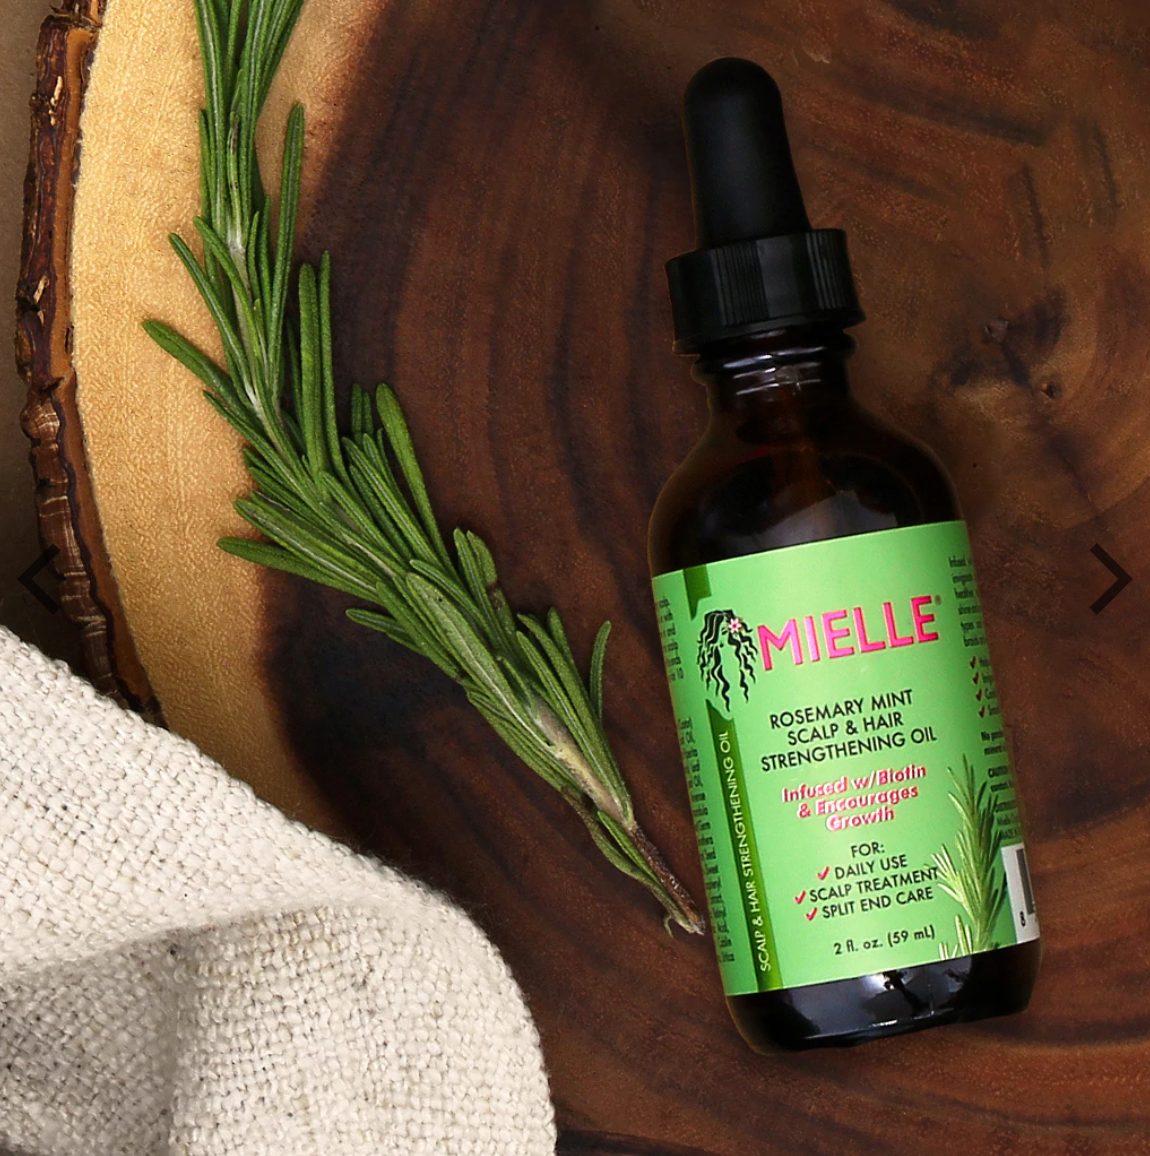 Mielle Organics Rosemary Mint Hair & Scalp Strengthening Products